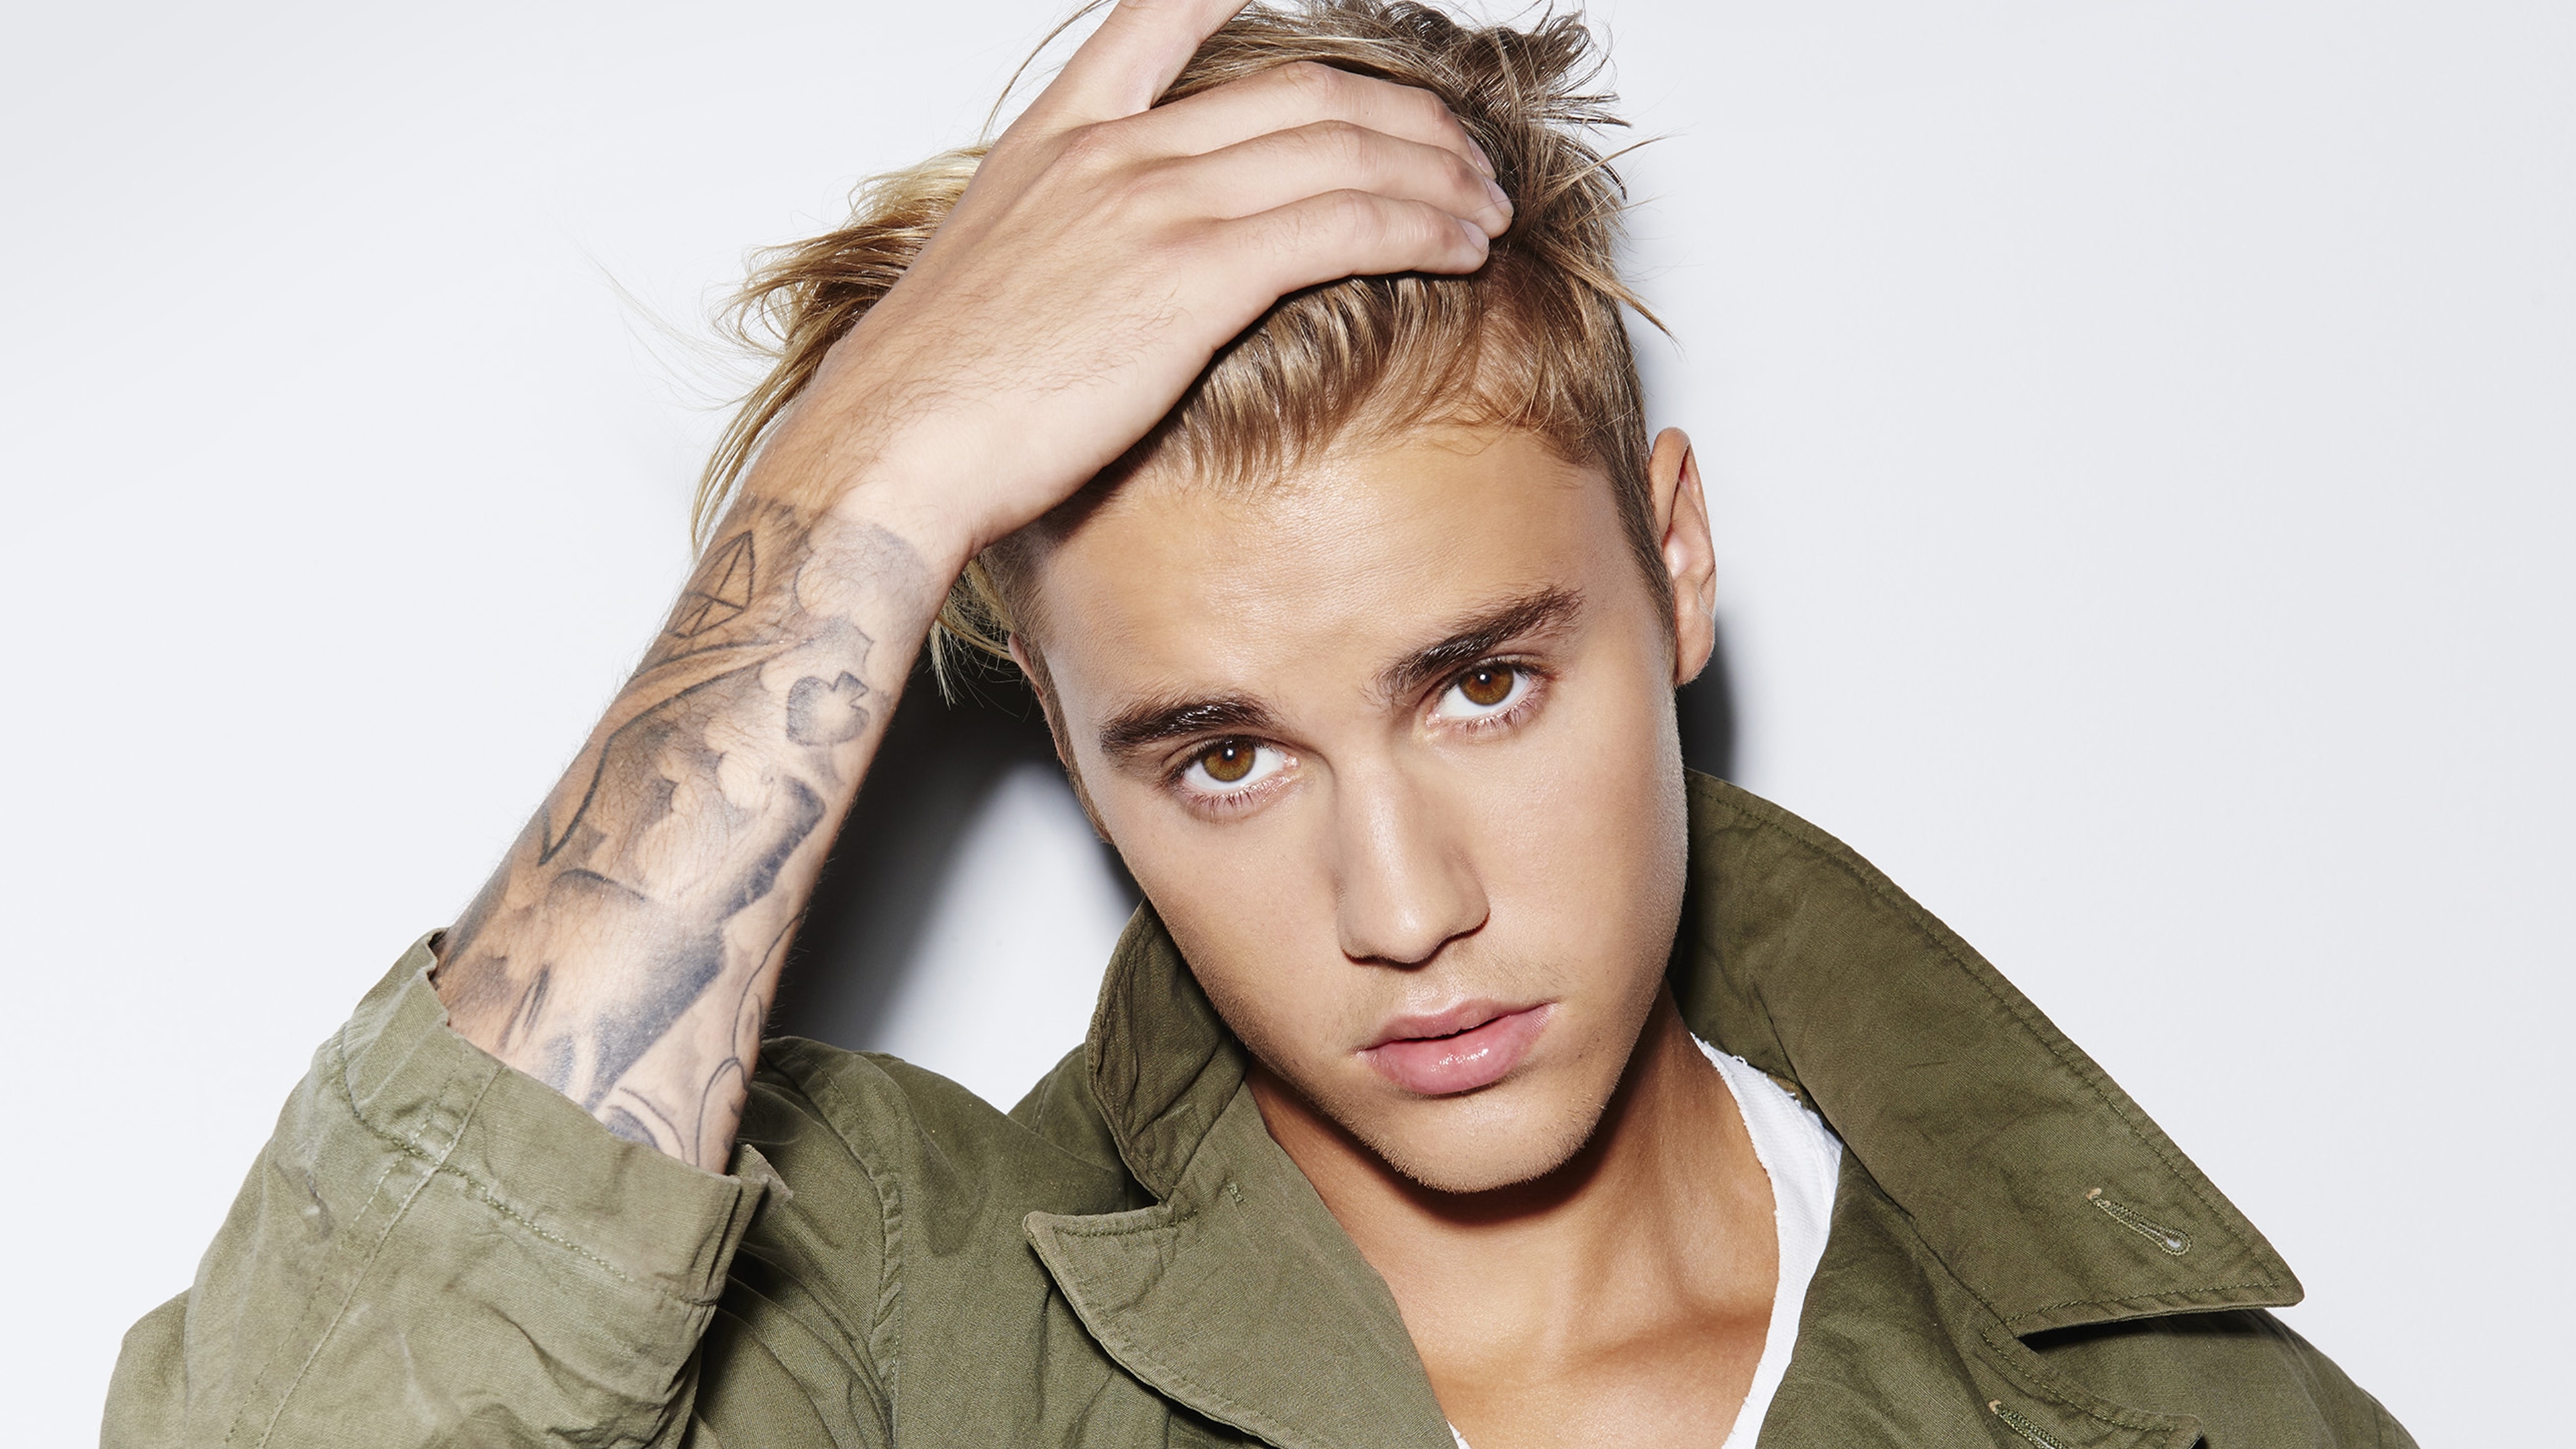 10 Most Popular Justin Bieber Pic 2016 FULL HD 1080p For PC Background